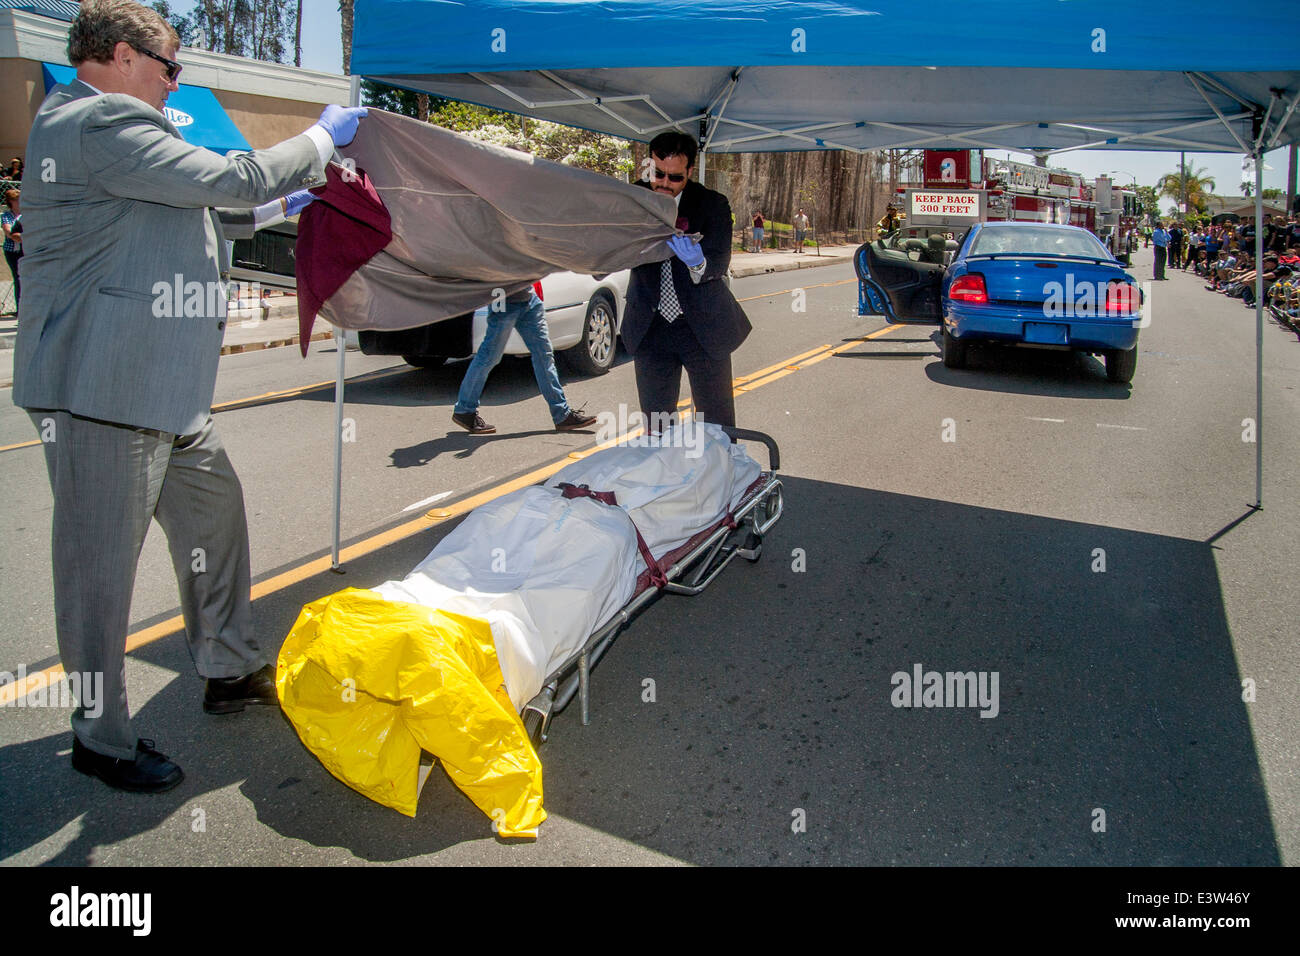 Local volunteer undertakers collect the 'corpse' of an accident victim in a dramatization for a high school audience of the dangers of drunk driving in Anaheim, CA. Note crowd in background. Stock Photo